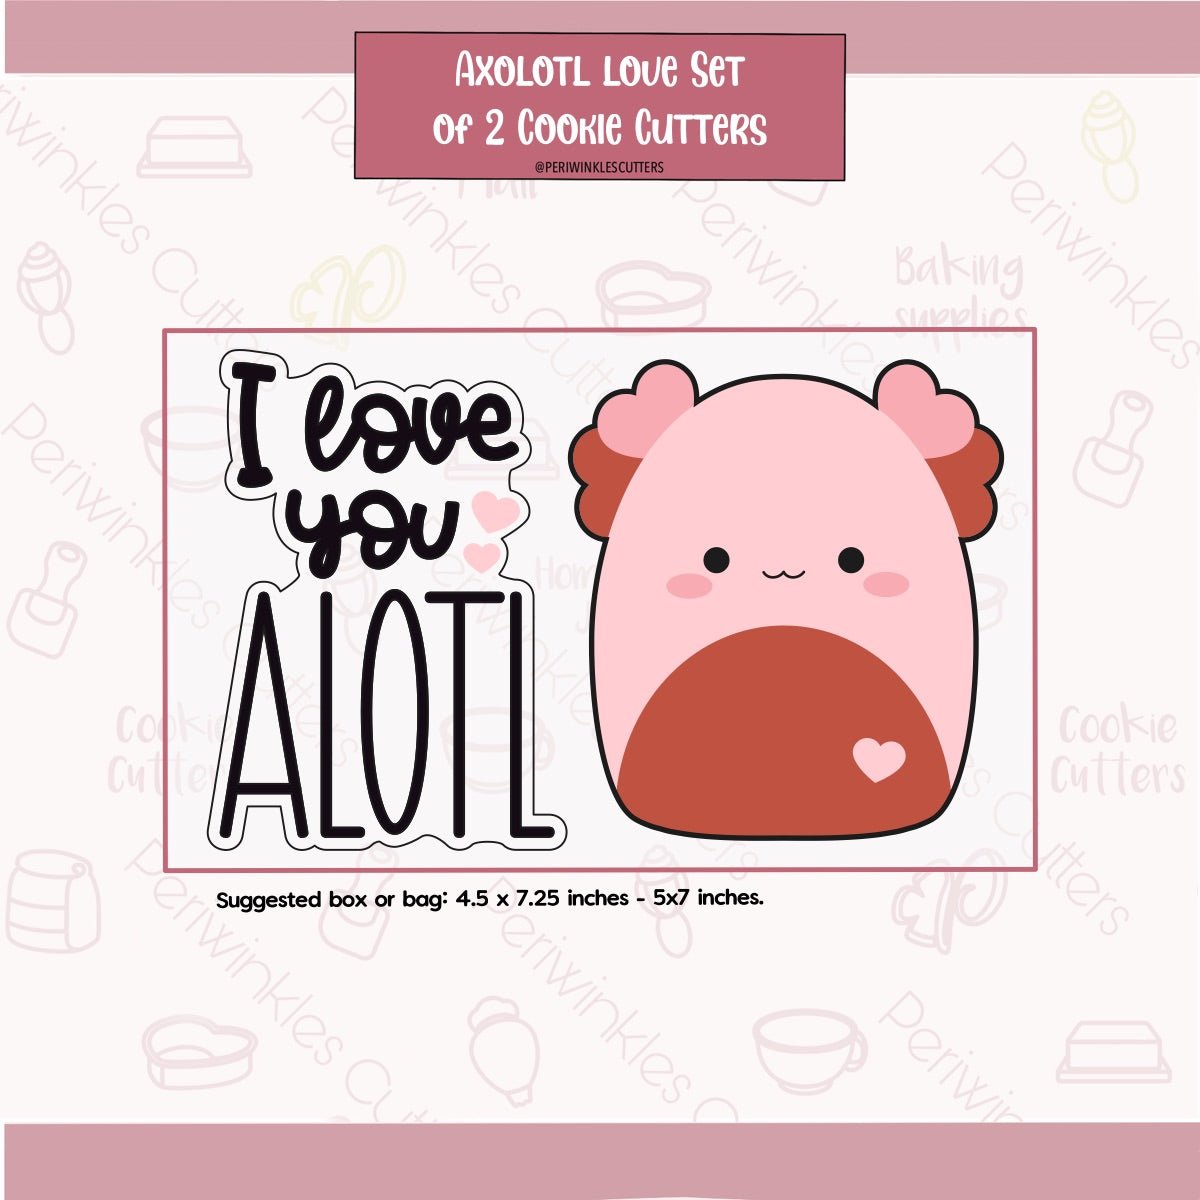 Squish Love you Alotl Set of 2 Cookie Cutter - Periwinkles Cutters Cookie Cutter